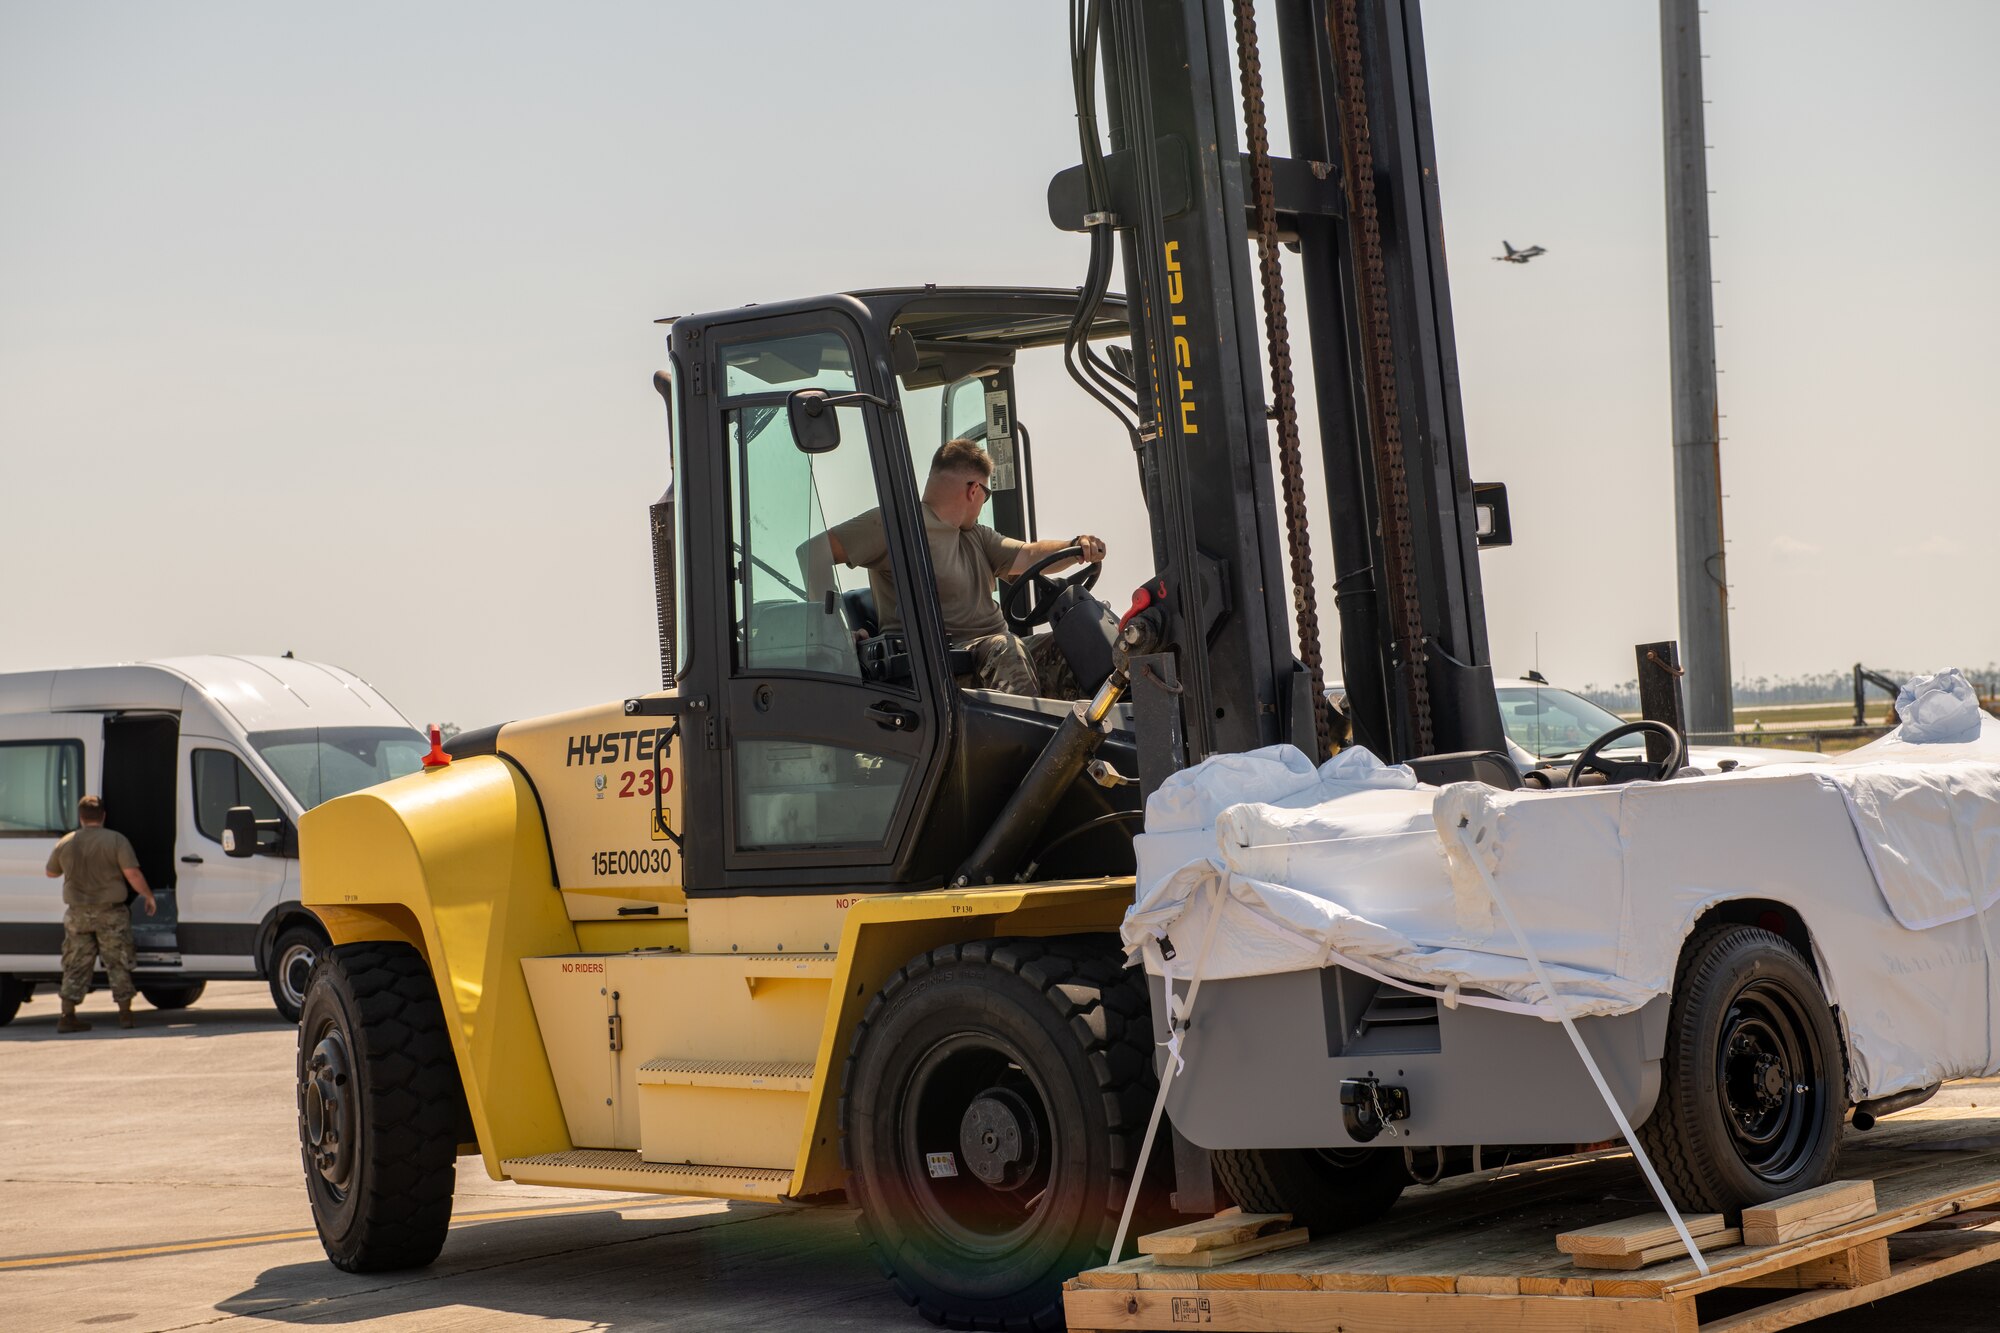 Airmen moves F-35 equipment with a forklift